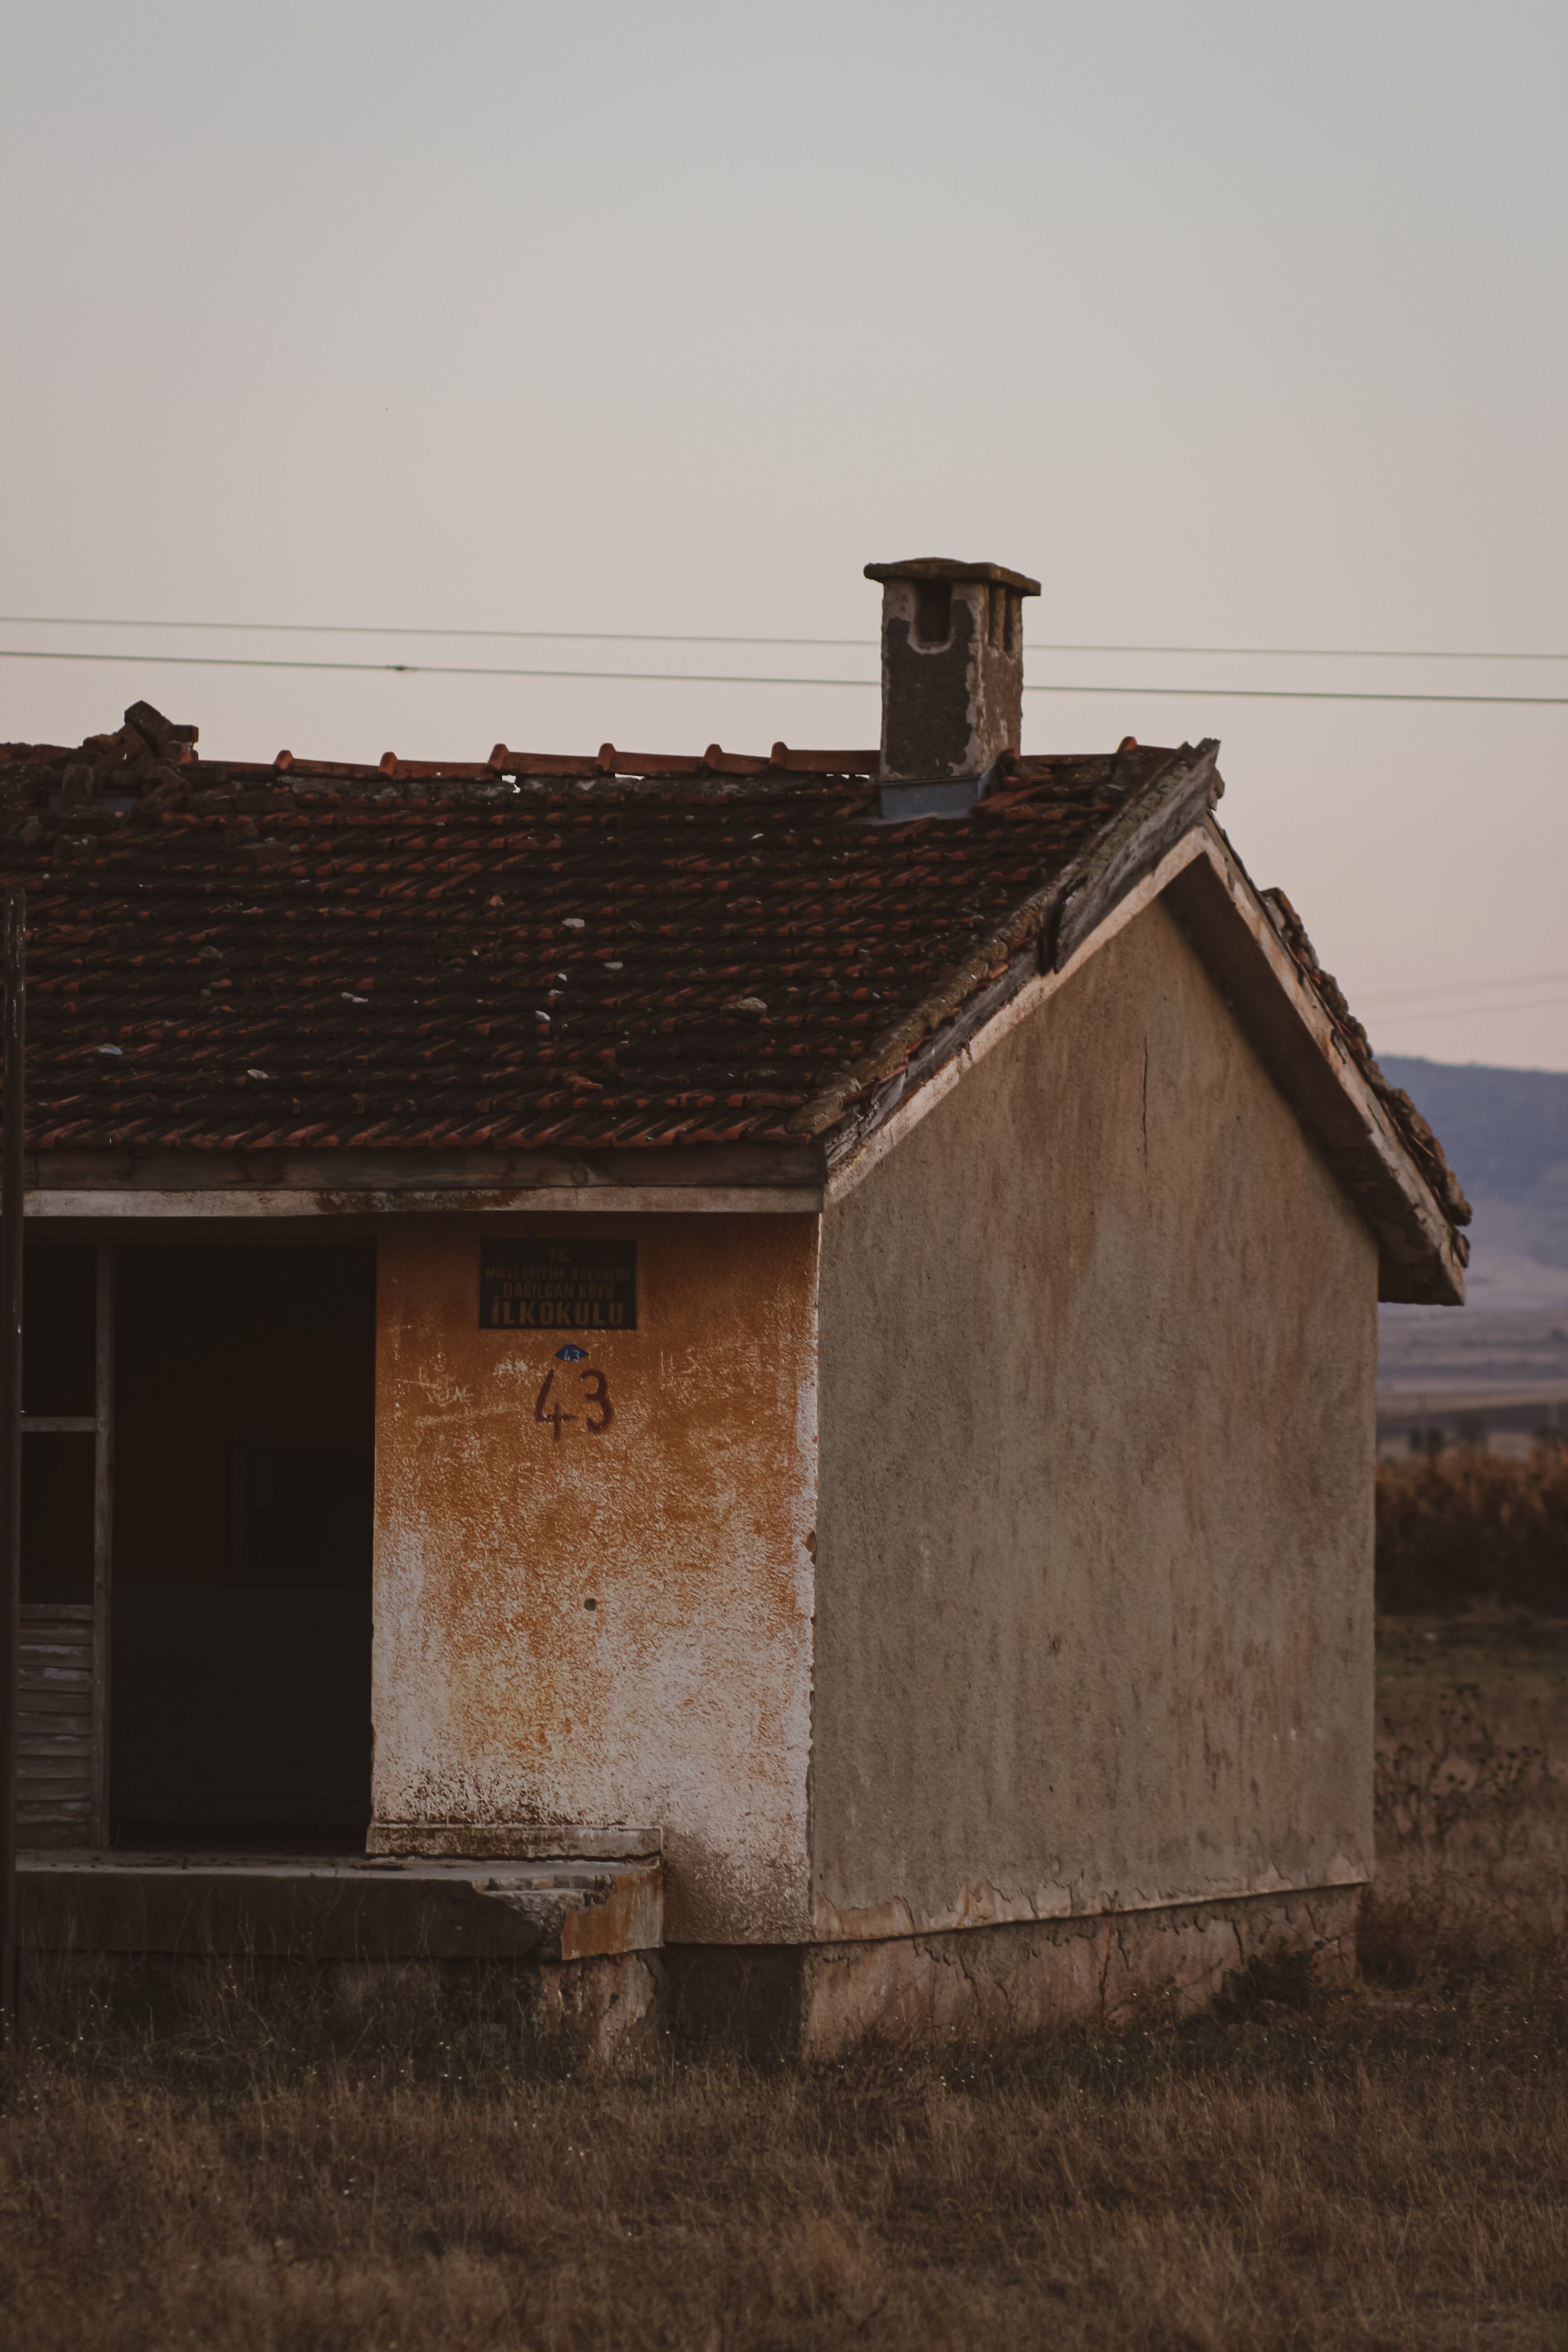 An old house on a farm. | Source: Pexels